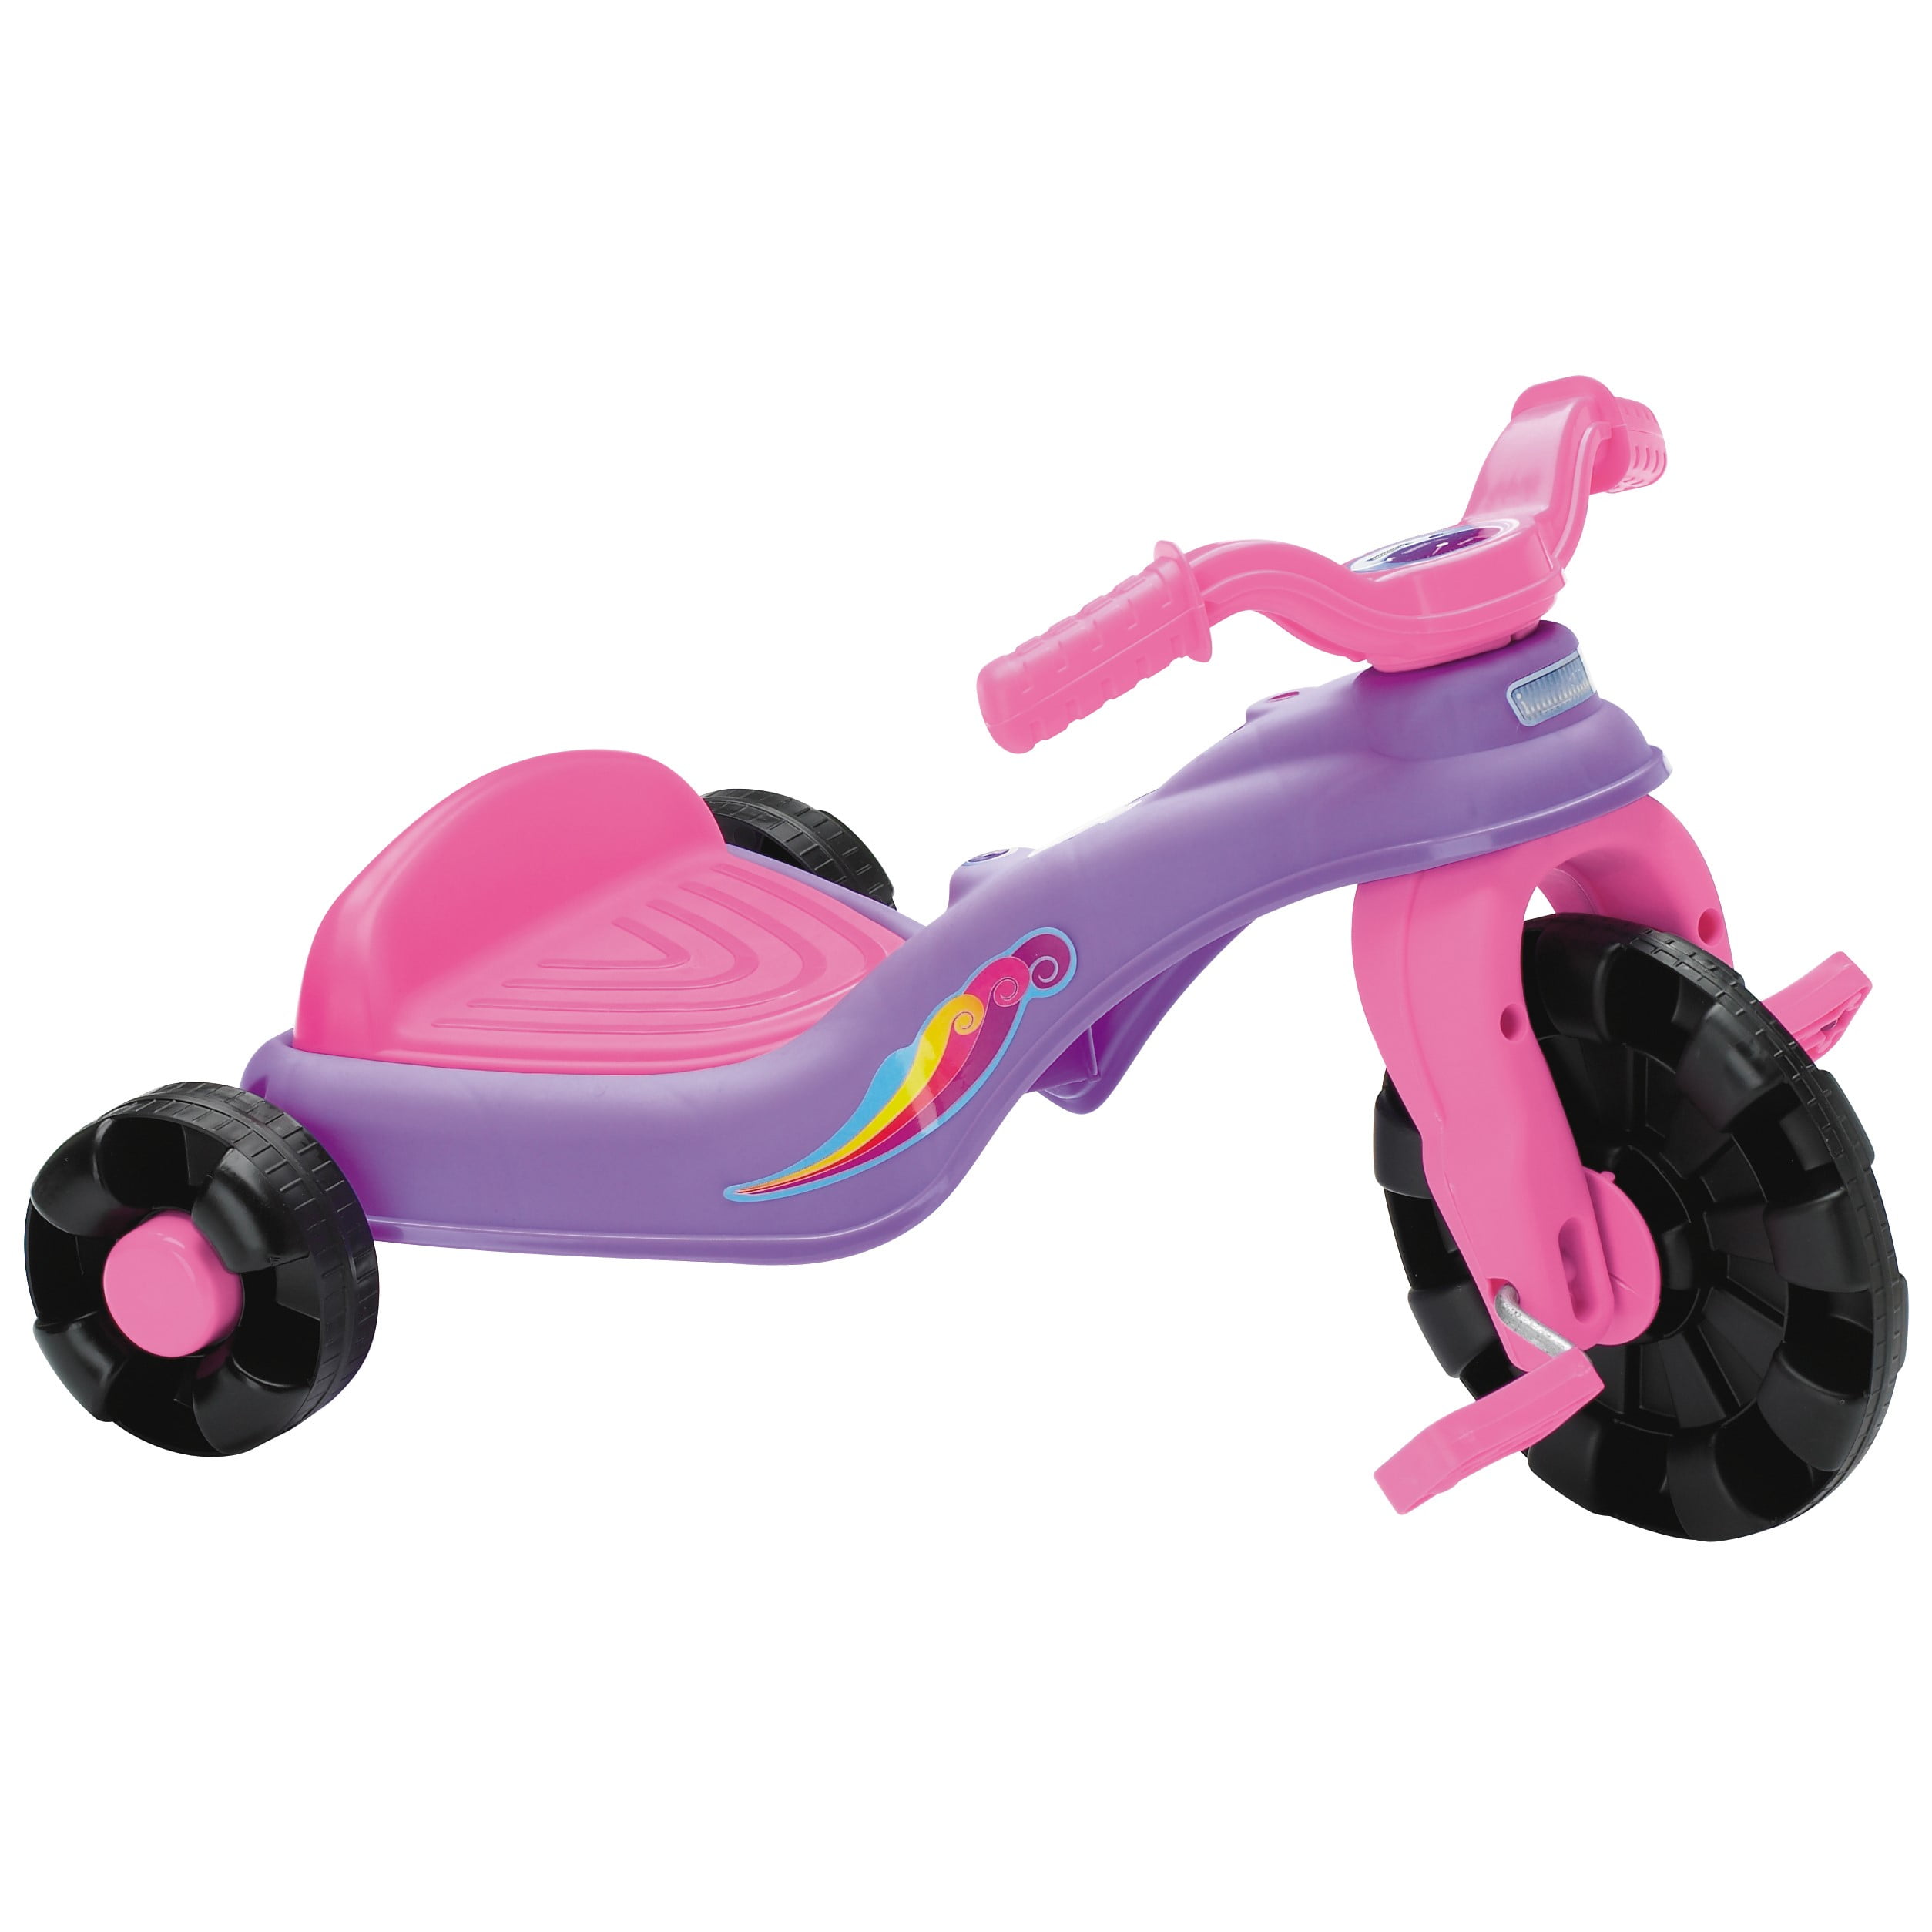 Tough Trike Toys Bikes For Toddlers Kids Harley Davidson Motorcycles Tricycles 